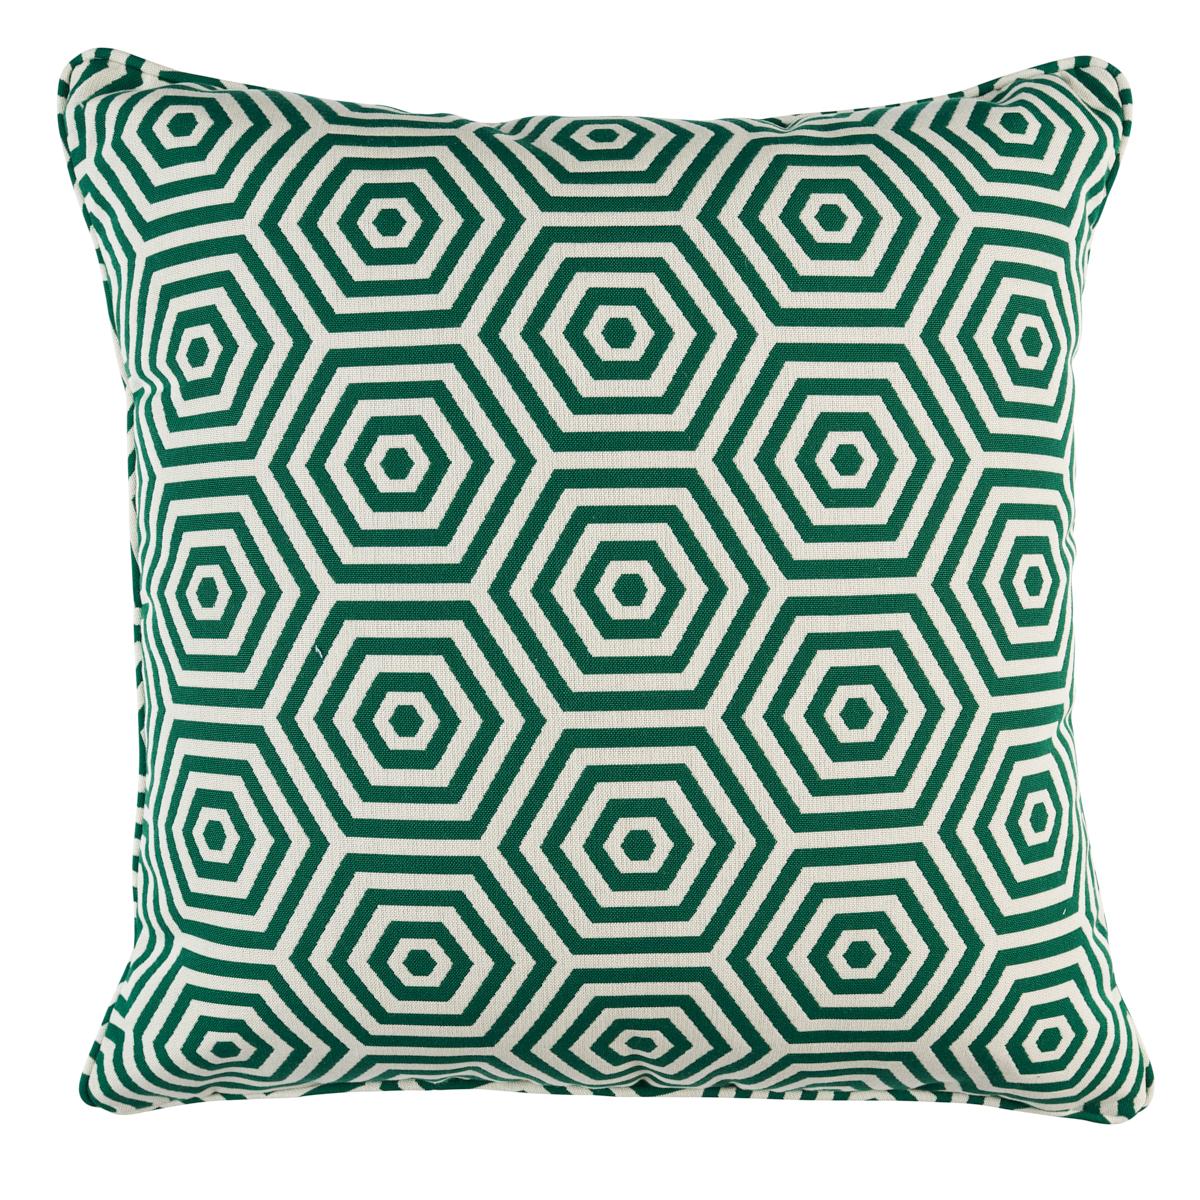 This pillow features Bees Knees Indoor/Outdoor by Mary McDonald for Schumacher with a self welt finish. Stylish and sturdy, Bees Knees Indoor/Outdoor in emerald is a fabulous, versatile fabric design by Mary McDonald. The tight high-performance